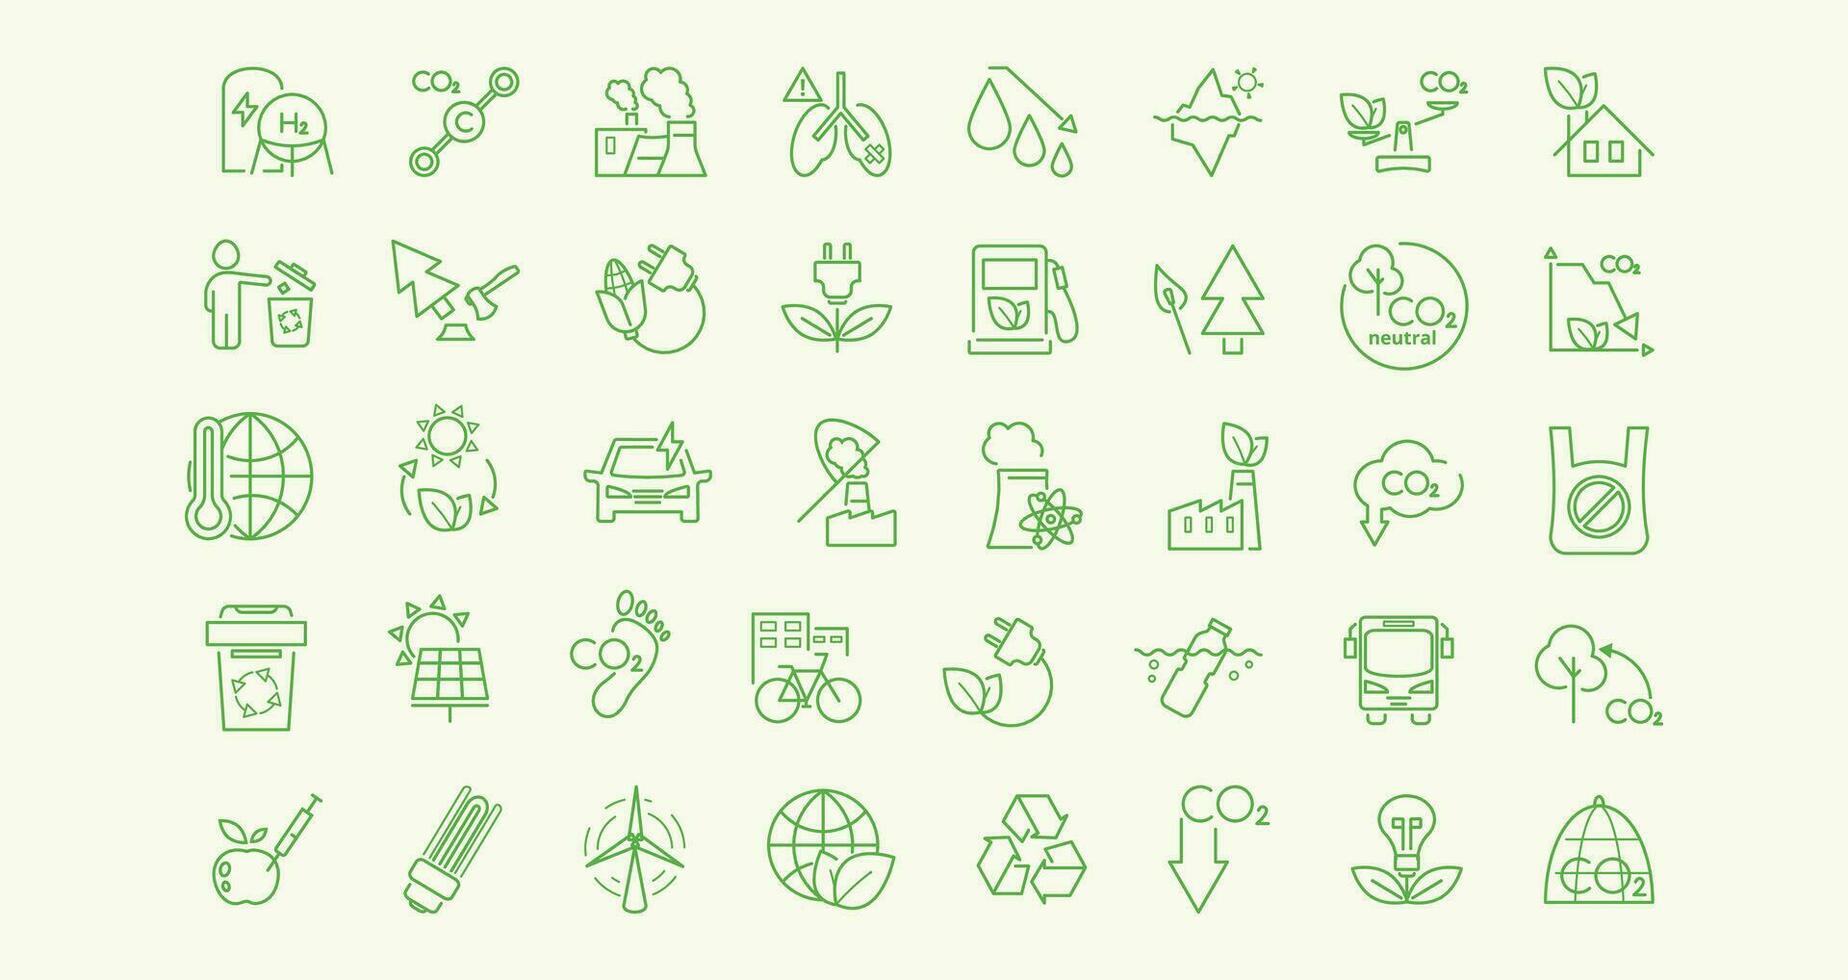 Ecology related line icon set. hydrogen, energy, co2 molecule, lungs, air, carbon capture, climate, deforestation, ocean pollution, plastic, biofuels, gmo vector illustration. Editable stroke